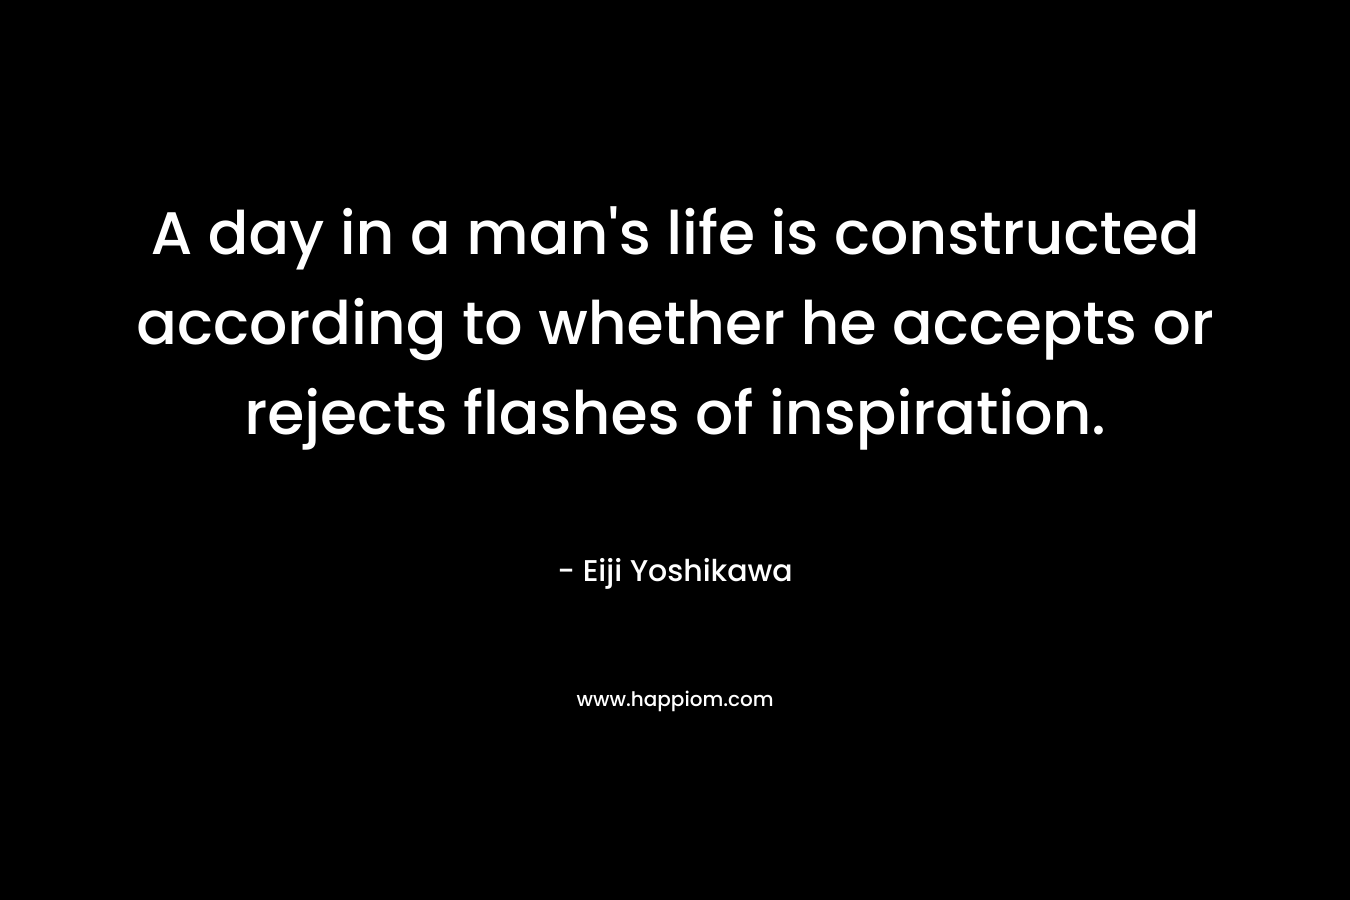 A day in a man's life is constructed according to whether he accepts or rejects flashes of inspiration.